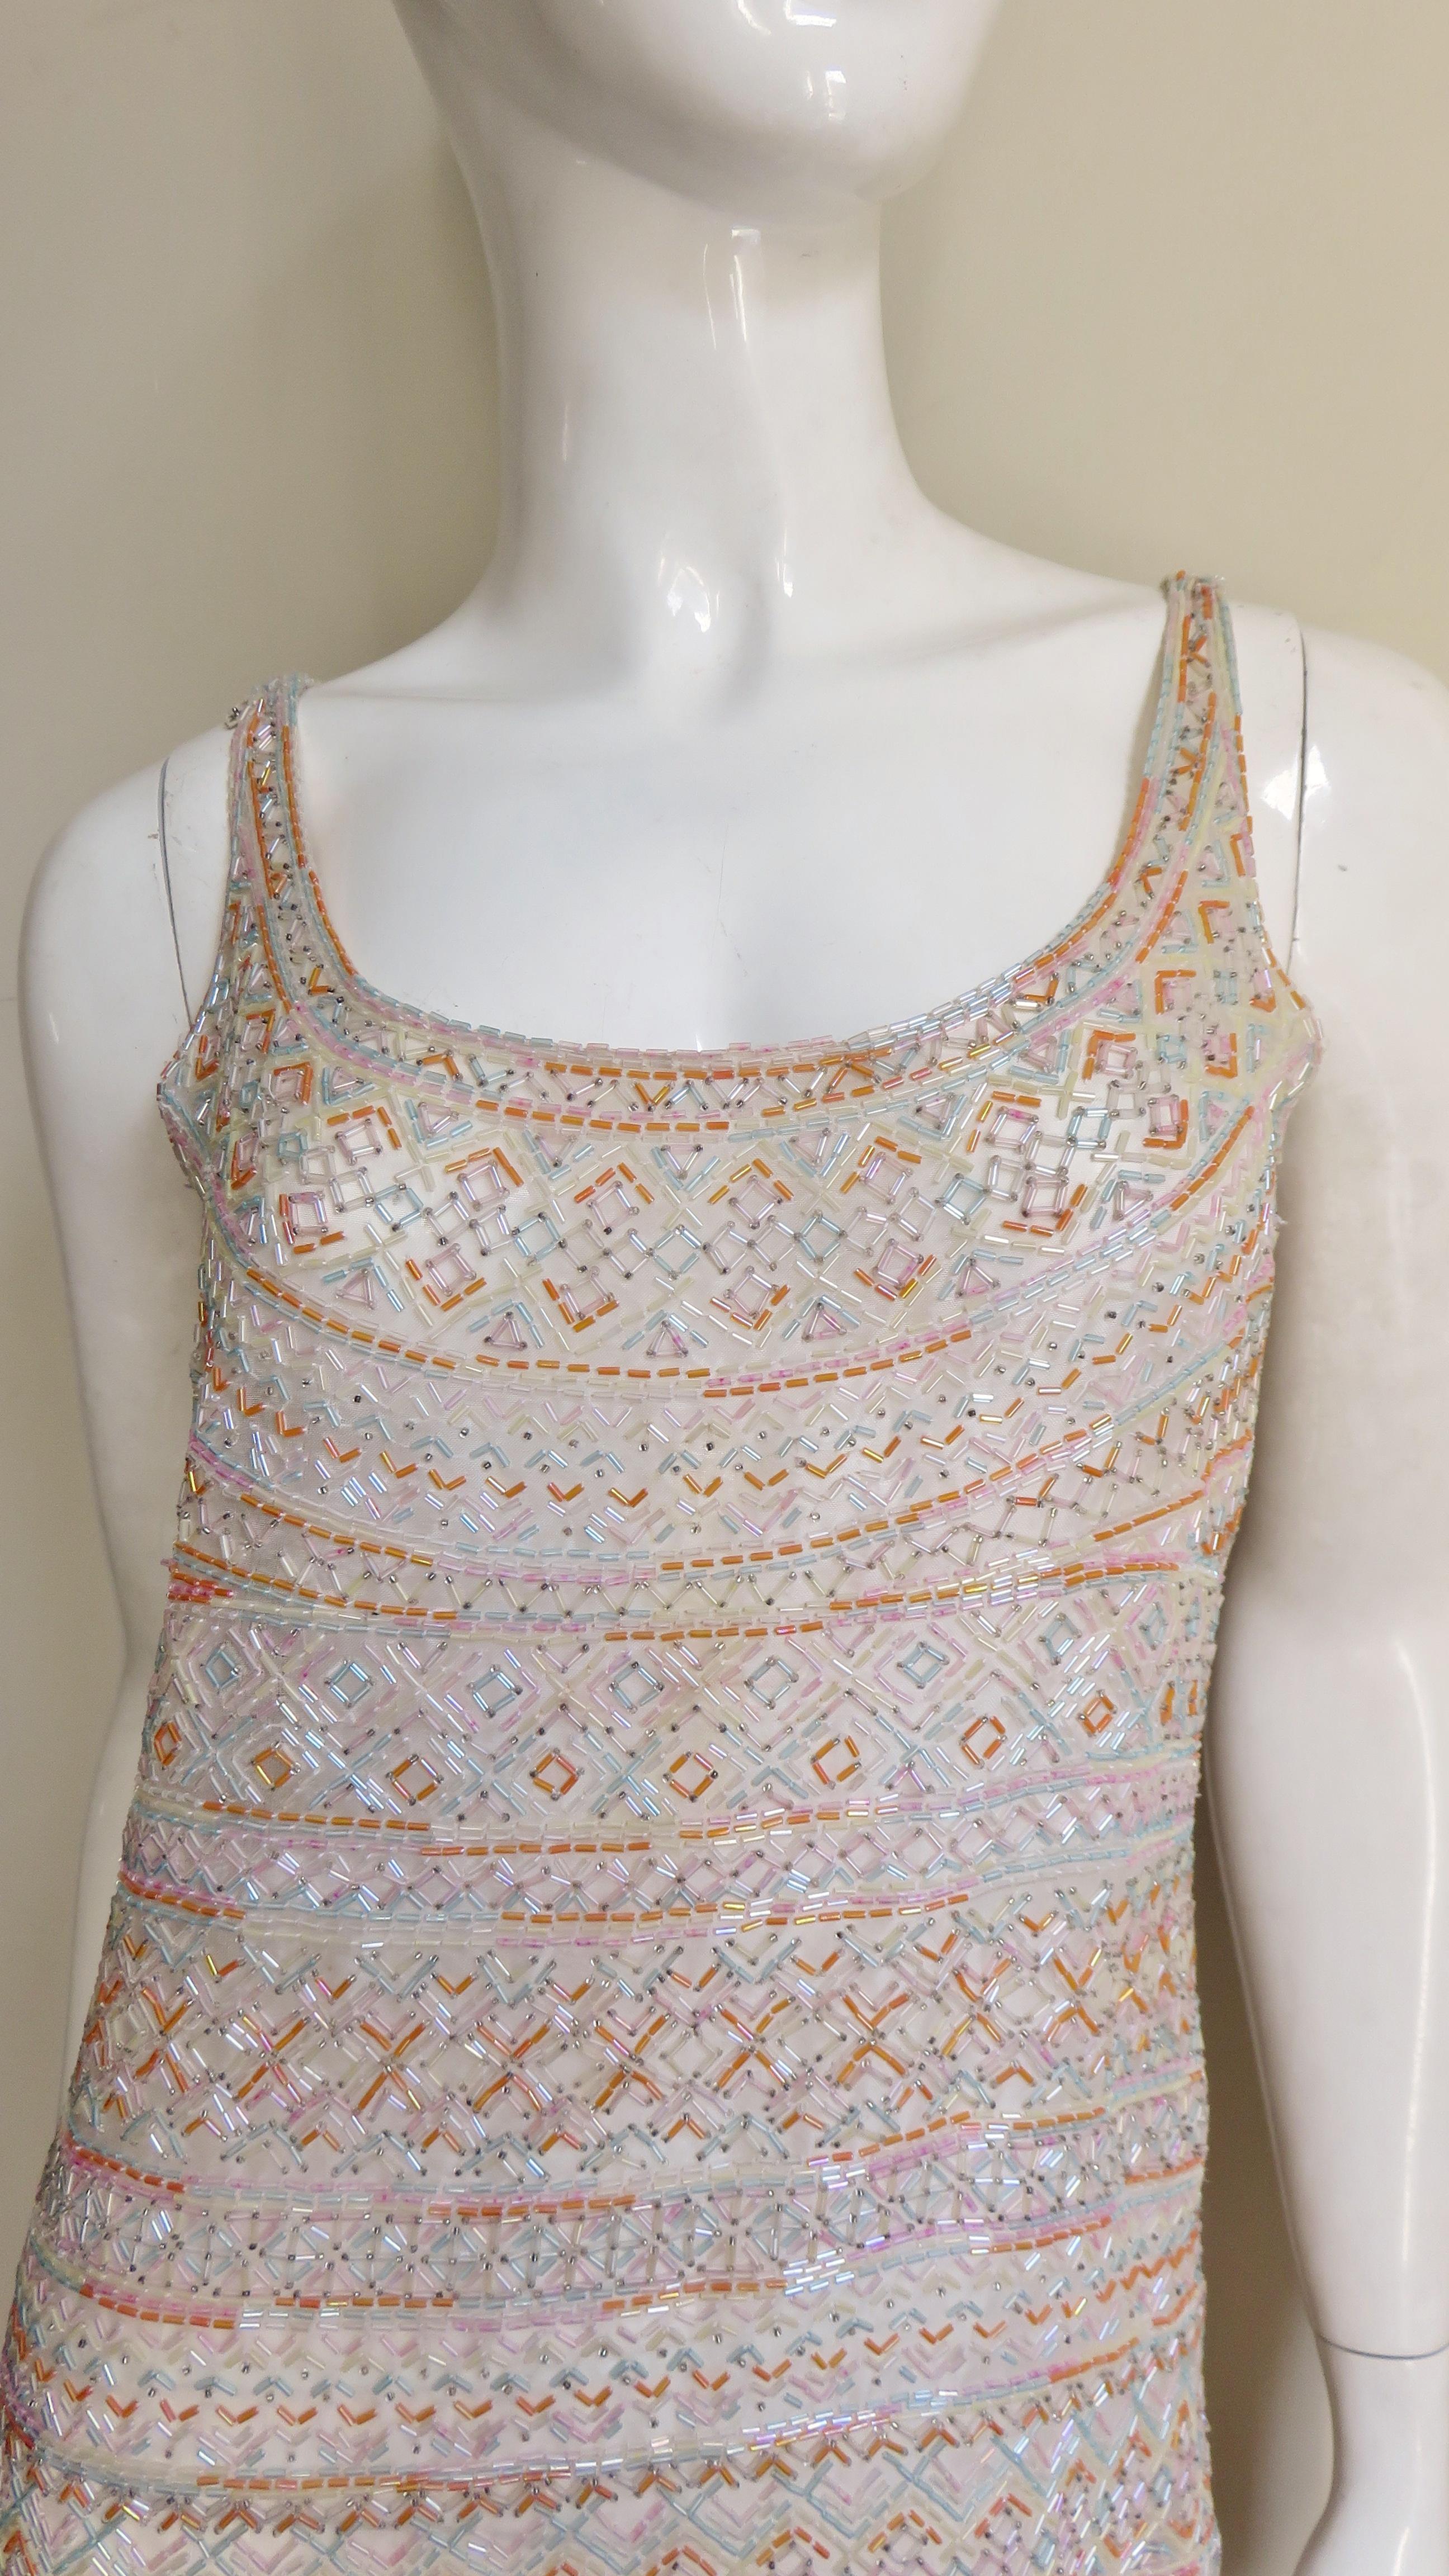  Halston 1970s Documented Beaded Dress  In Good Condition For Sale In Water Mill, NY